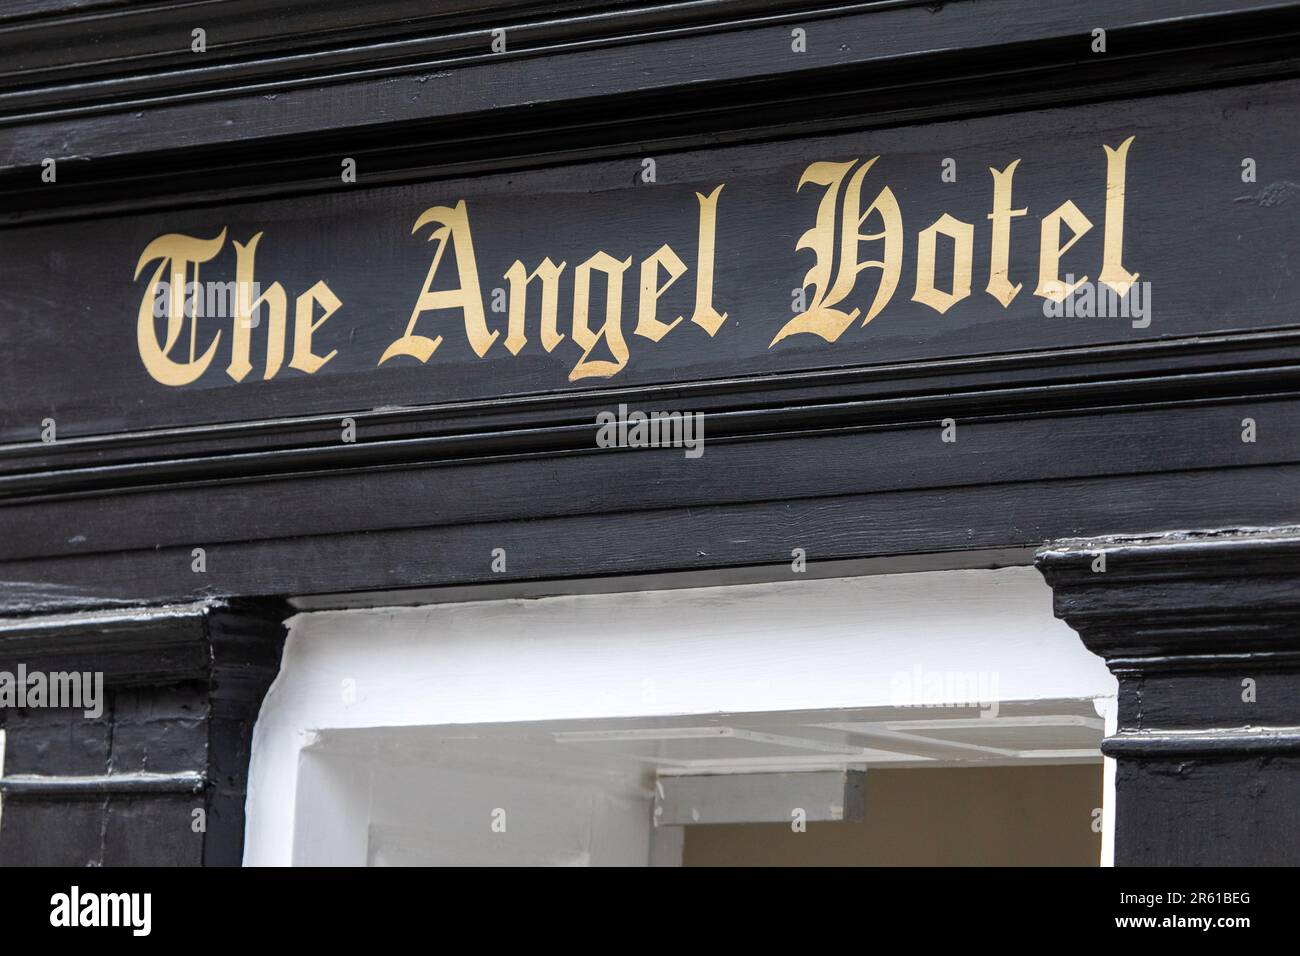 Surrey, UK - April 5th 2023: The exterior of The Angel Hotel which historically served as a posting house, in the town of Guildford in Surrey, UK. Stock Photo